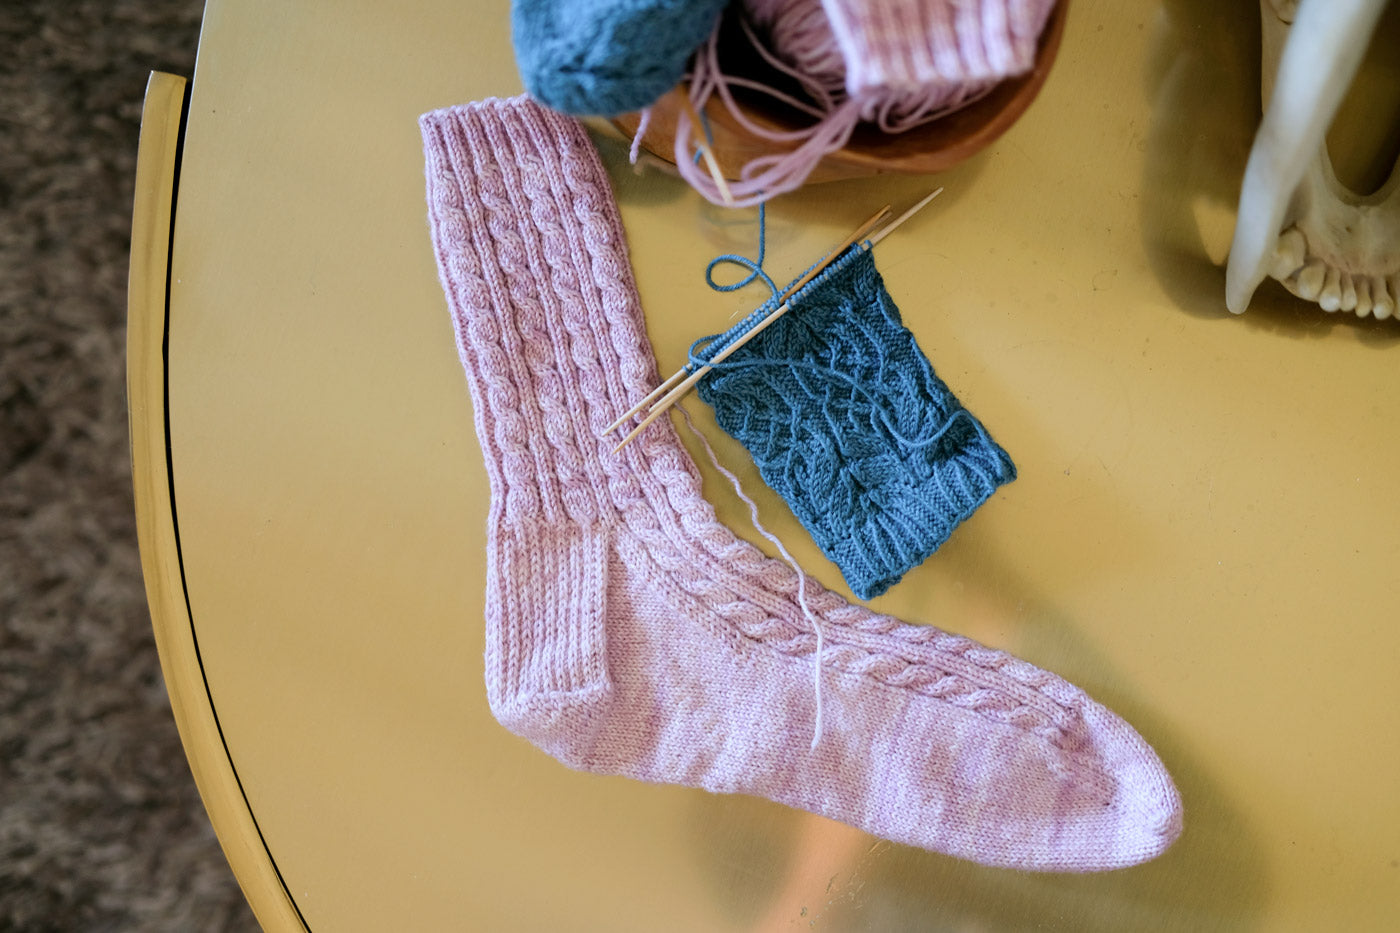 Partially knit socks on a gold table